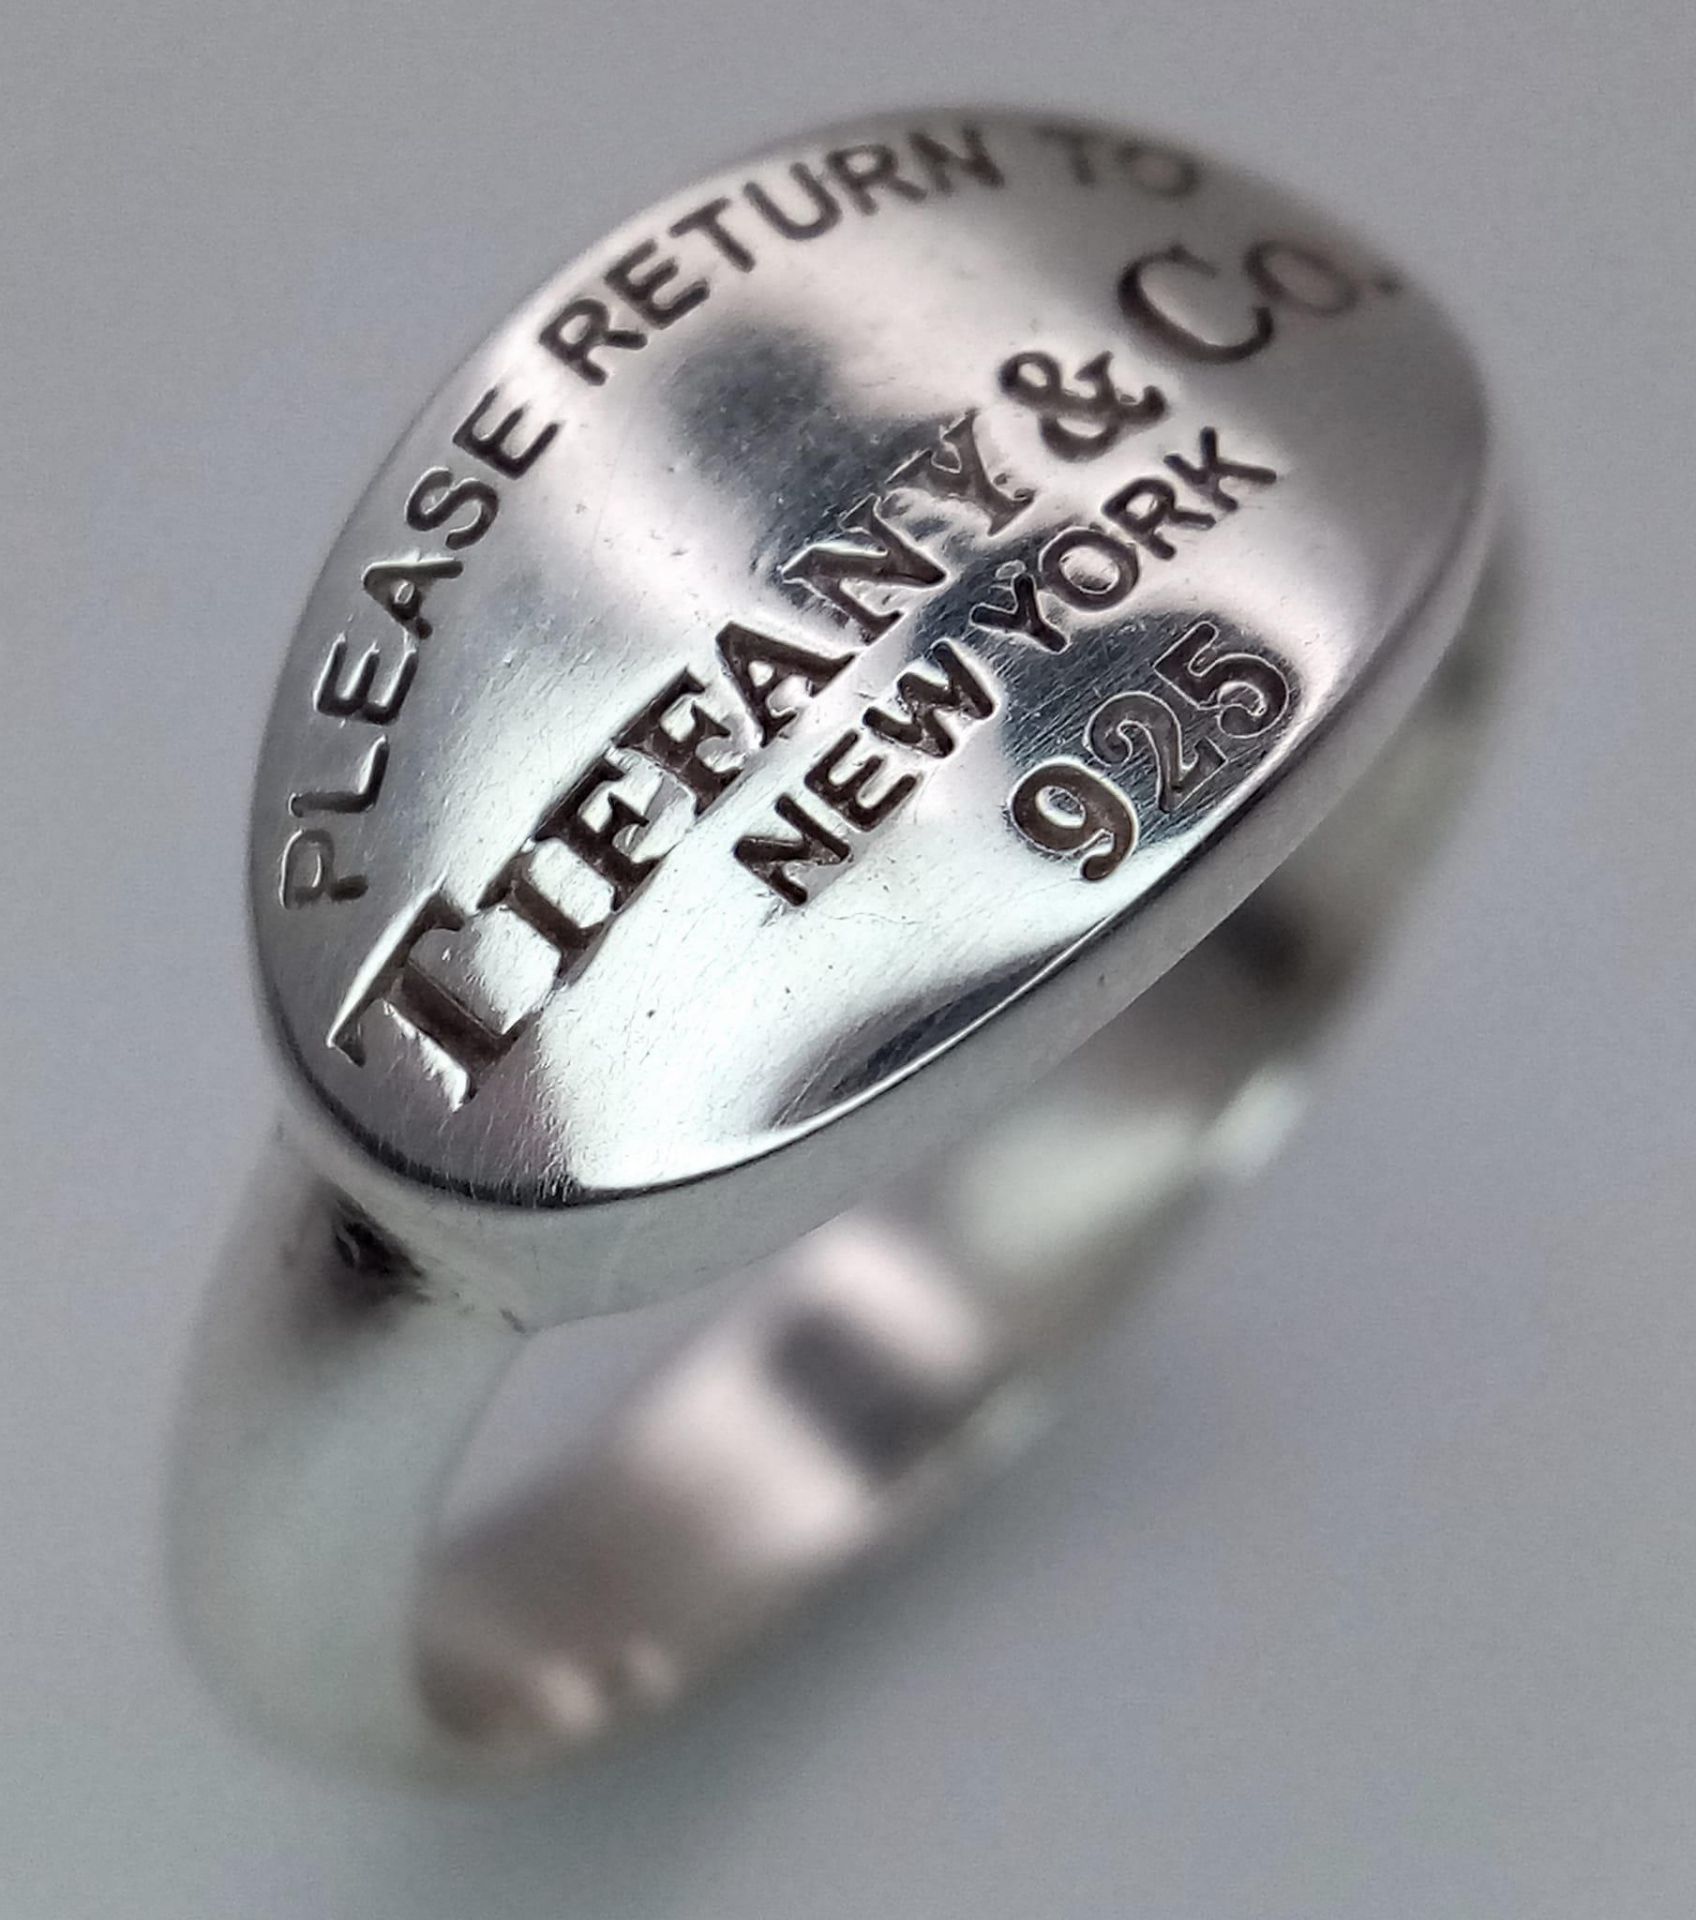 A Please Return to Tiffany & Co. Silver Signet Ring. Comes with a Tiffany pouch. Size O. Ref: 016081 - Image 2 of 4